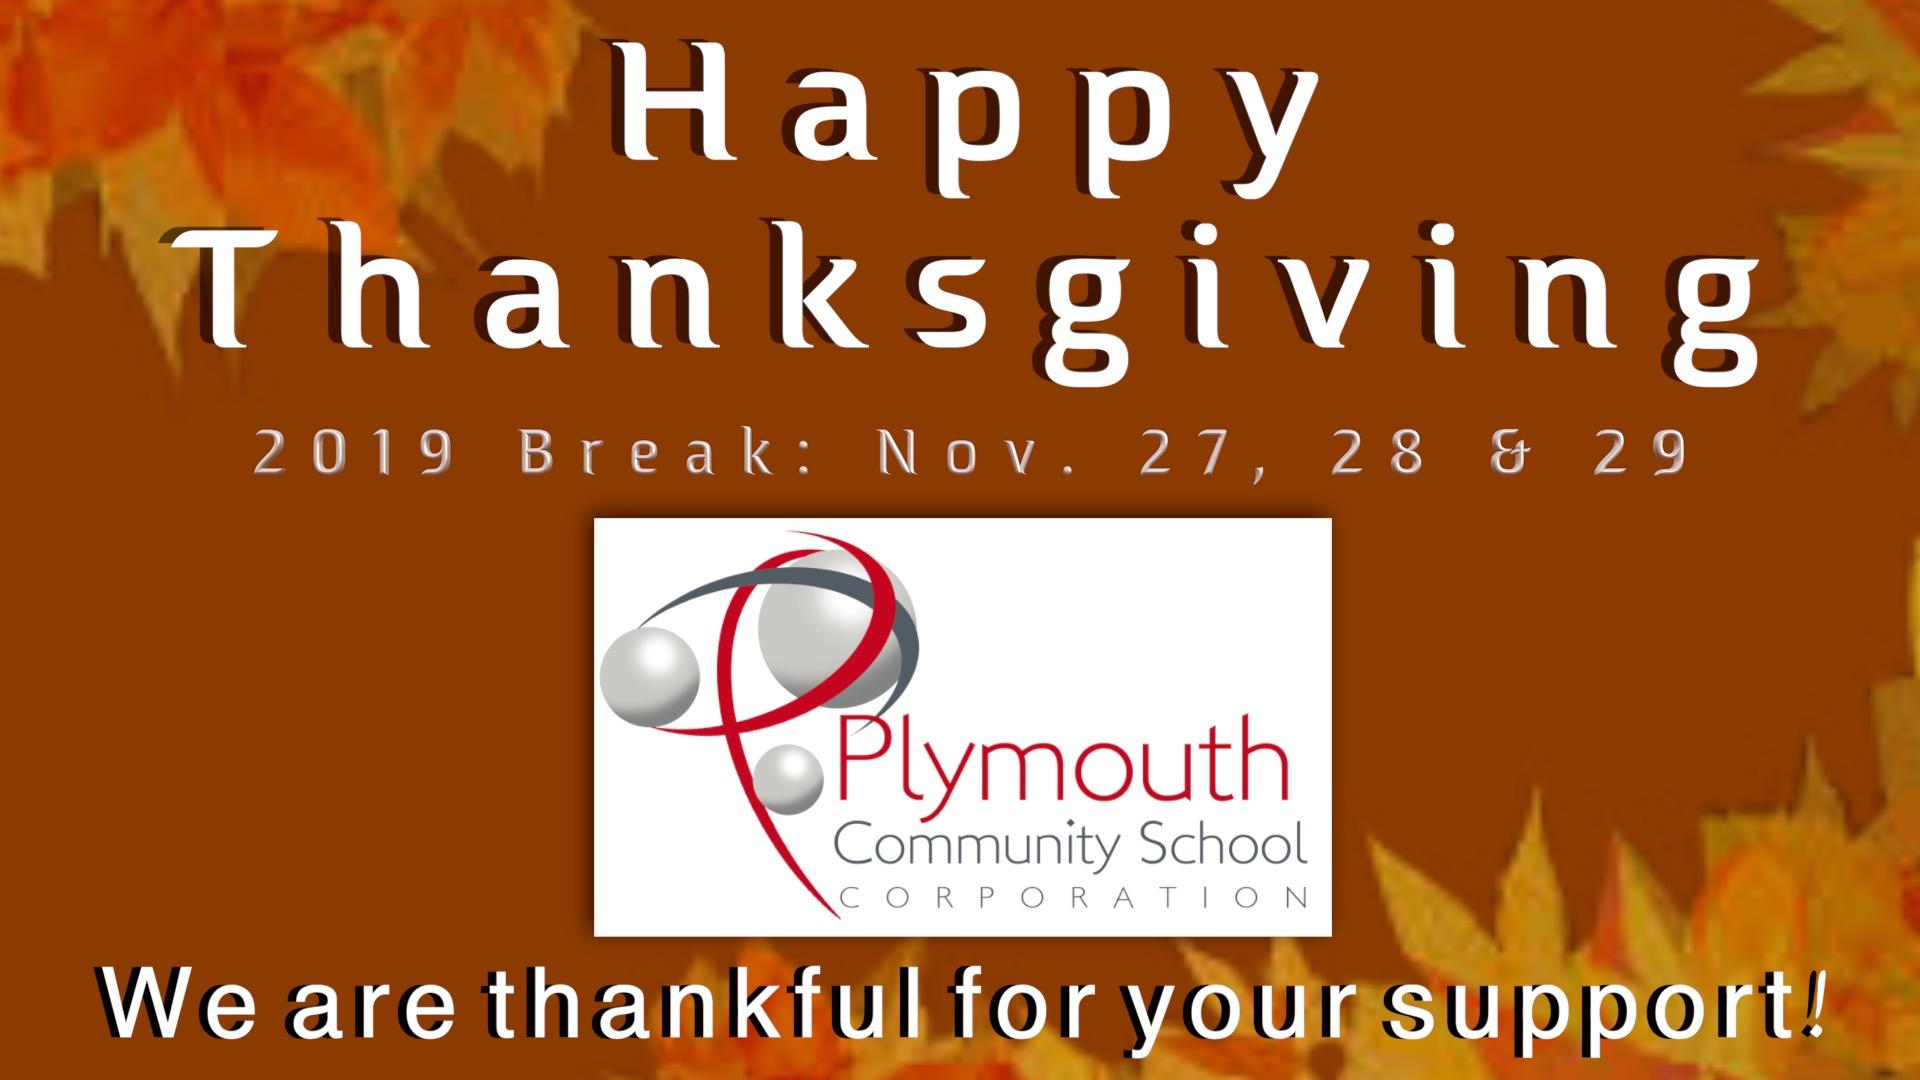 Happy Thanksgiving 2019 Break: Nov. 27, 28 & 29 PCSC logo We are thankful for your support! on brown leaf background